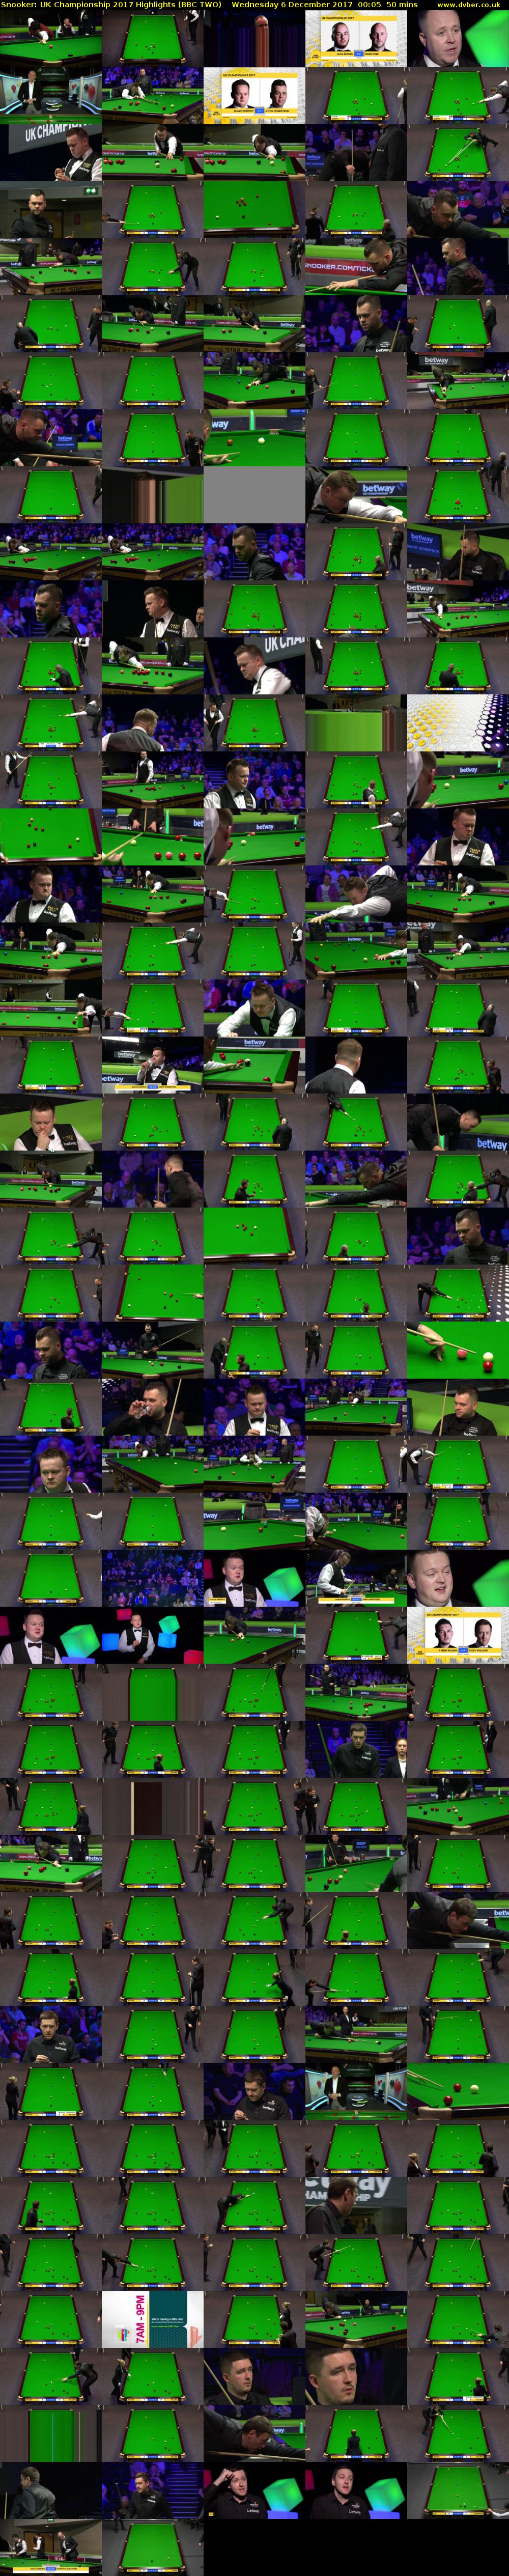 Snooker: UK Championship 2017 Highlights (BBC TWO) Wednesday 6 December 2017 00:05 - 00:55